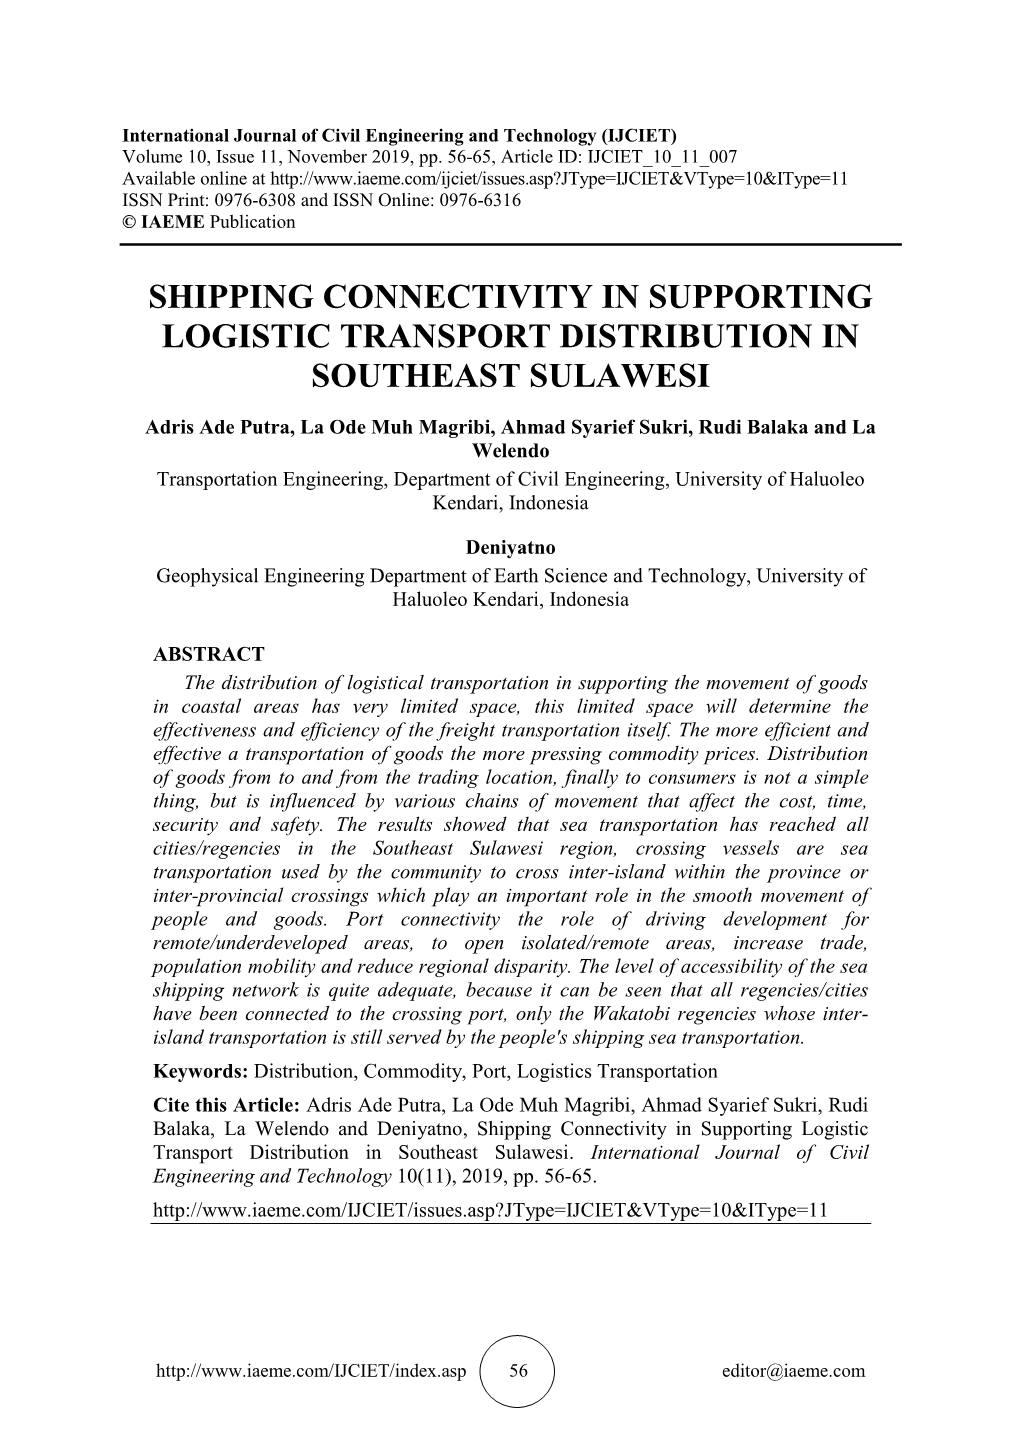 Shipping Connectivity in Supporting Logistic Transport Distribution in Southeast Sulawesi